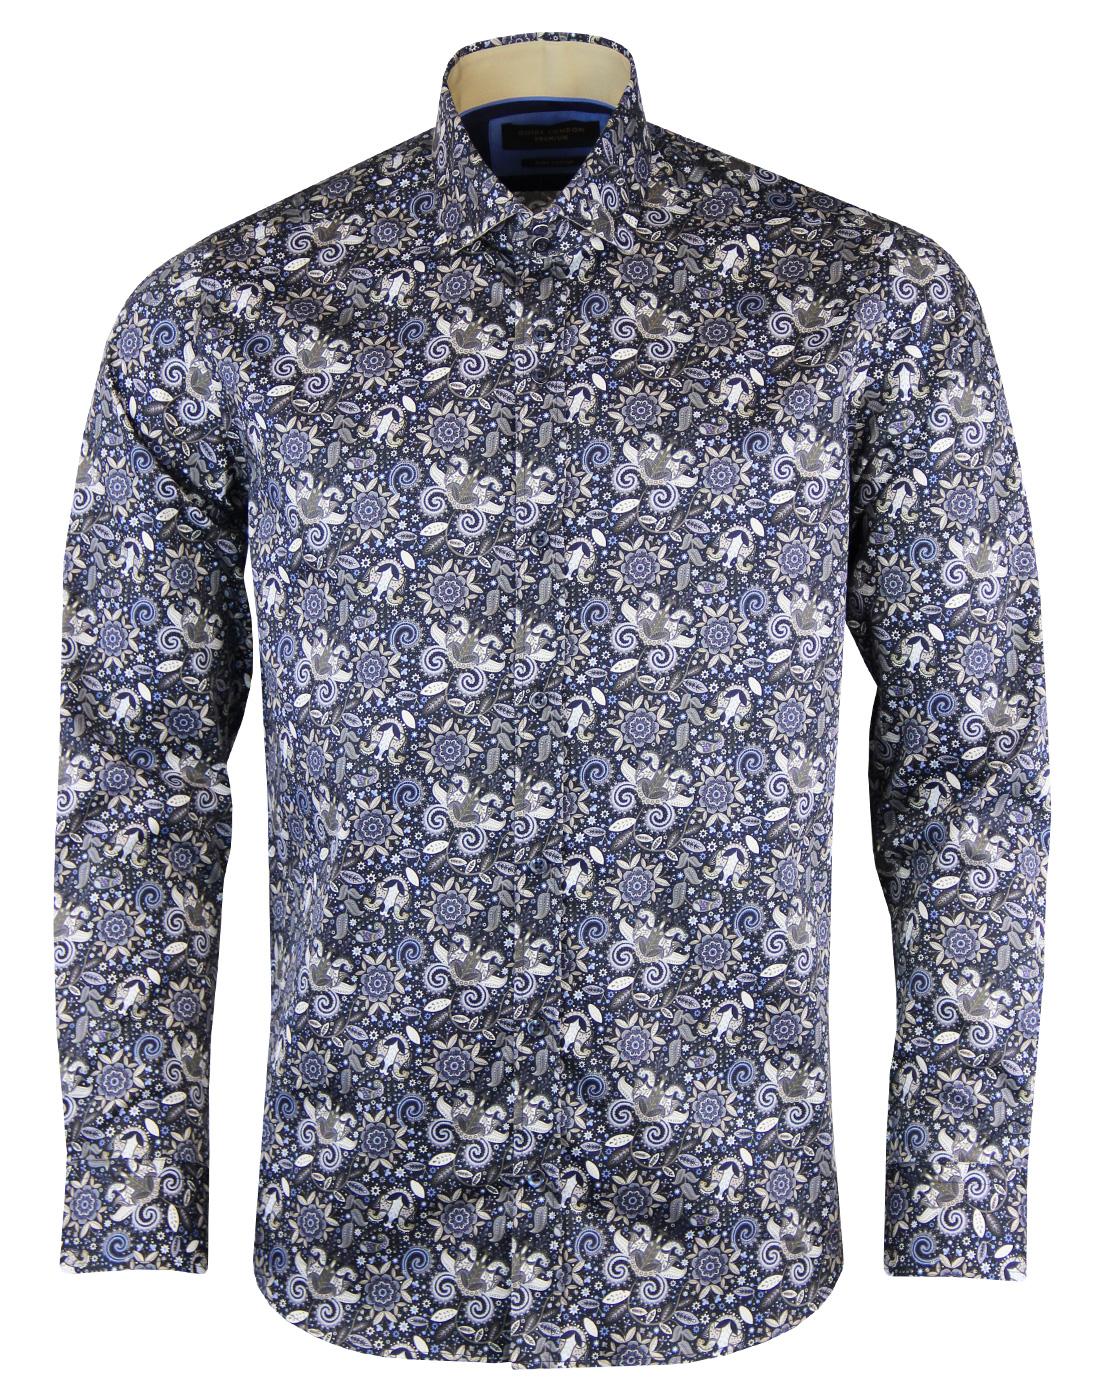 GUIDE LONDON 1960s Mod Floral Paisley Spread Collar Shirt in Navy